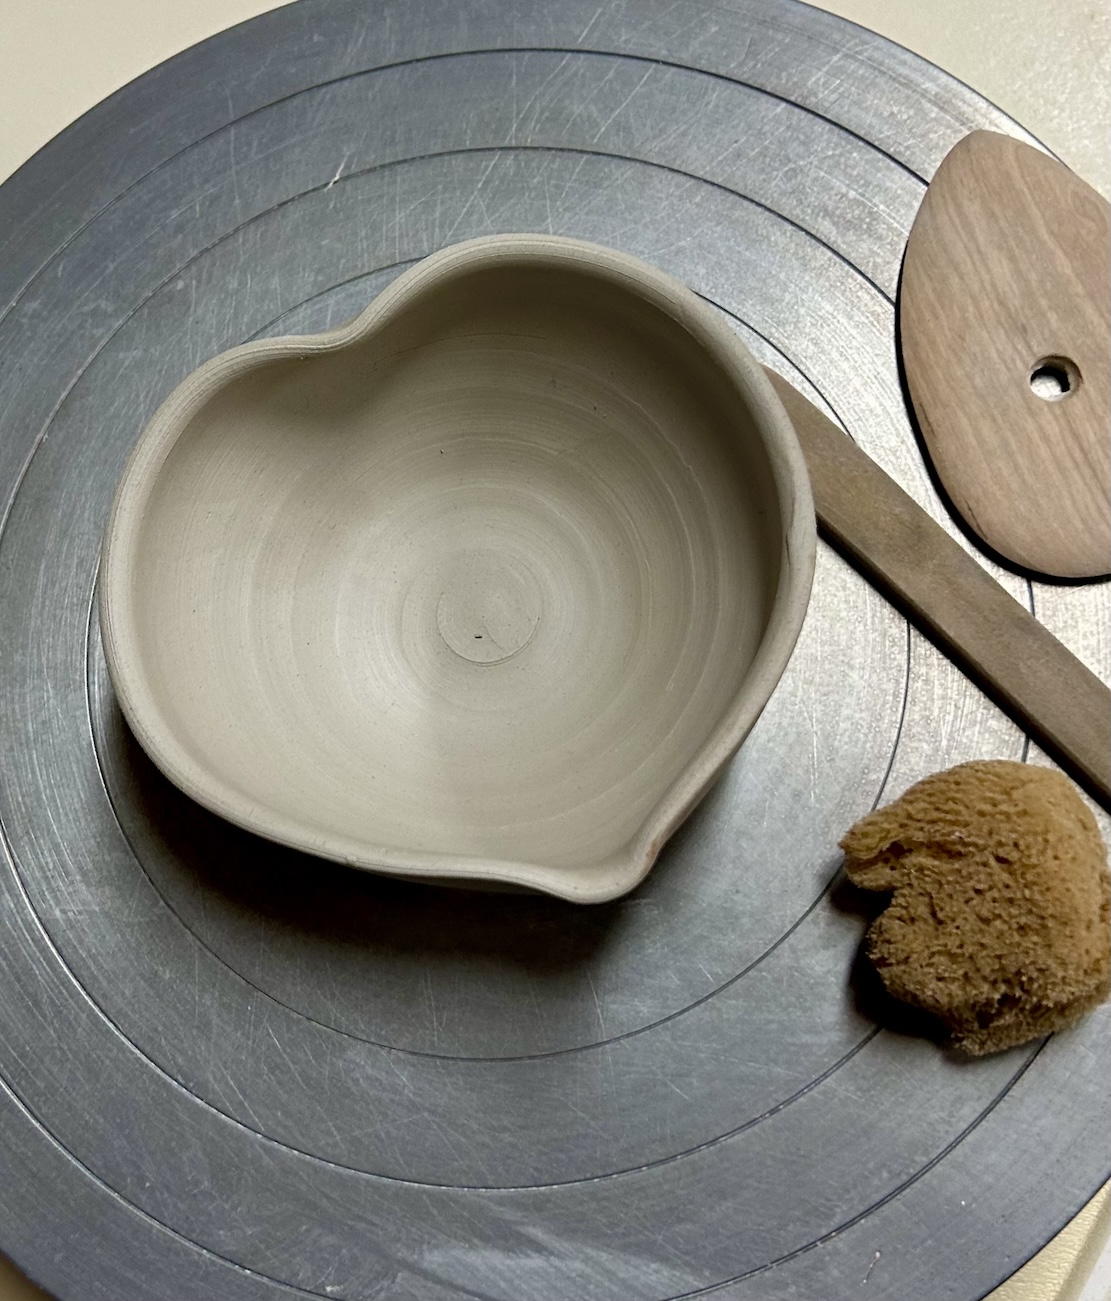 heart shaped clay bowl on a potter's wheel with tools